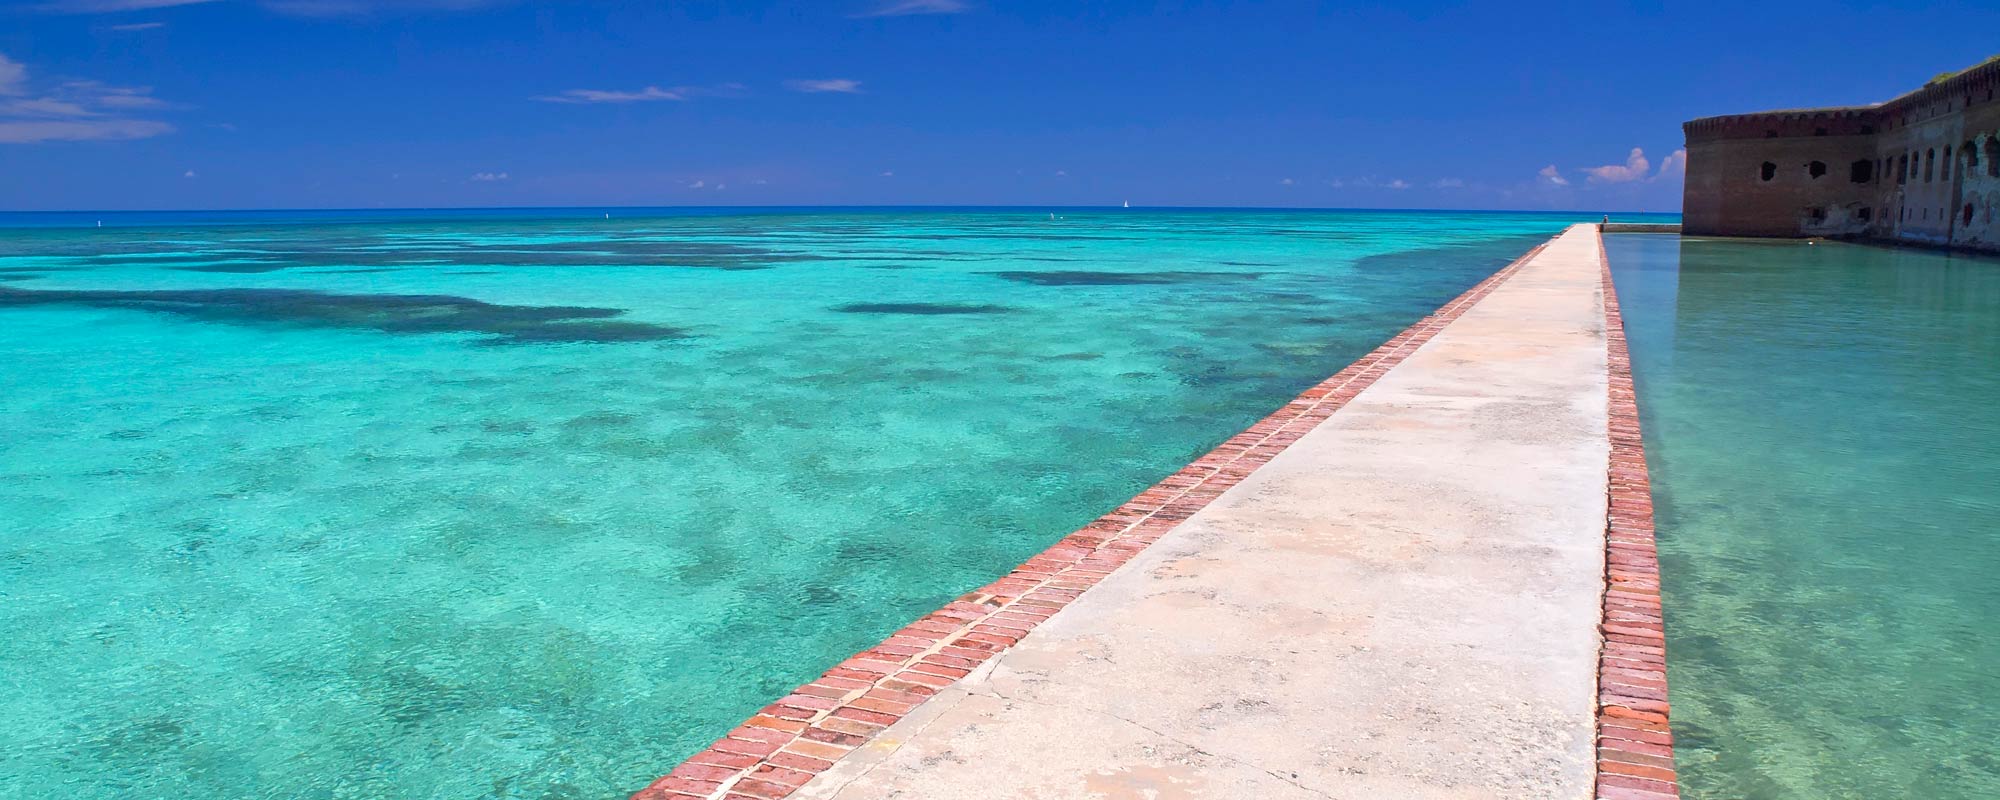 Entering Dry Tortugas National Park in the Gulf of Mexico